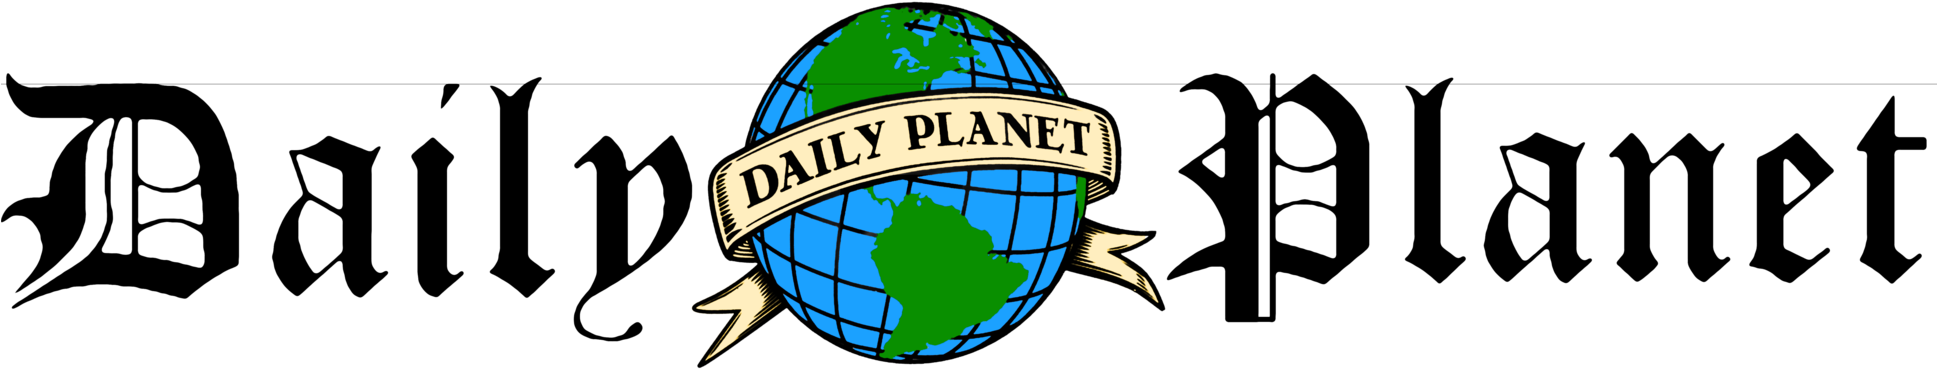 Daily Planet Logo By Noahlc On Deviantart - Daily Planet Press Badge (1936x413)